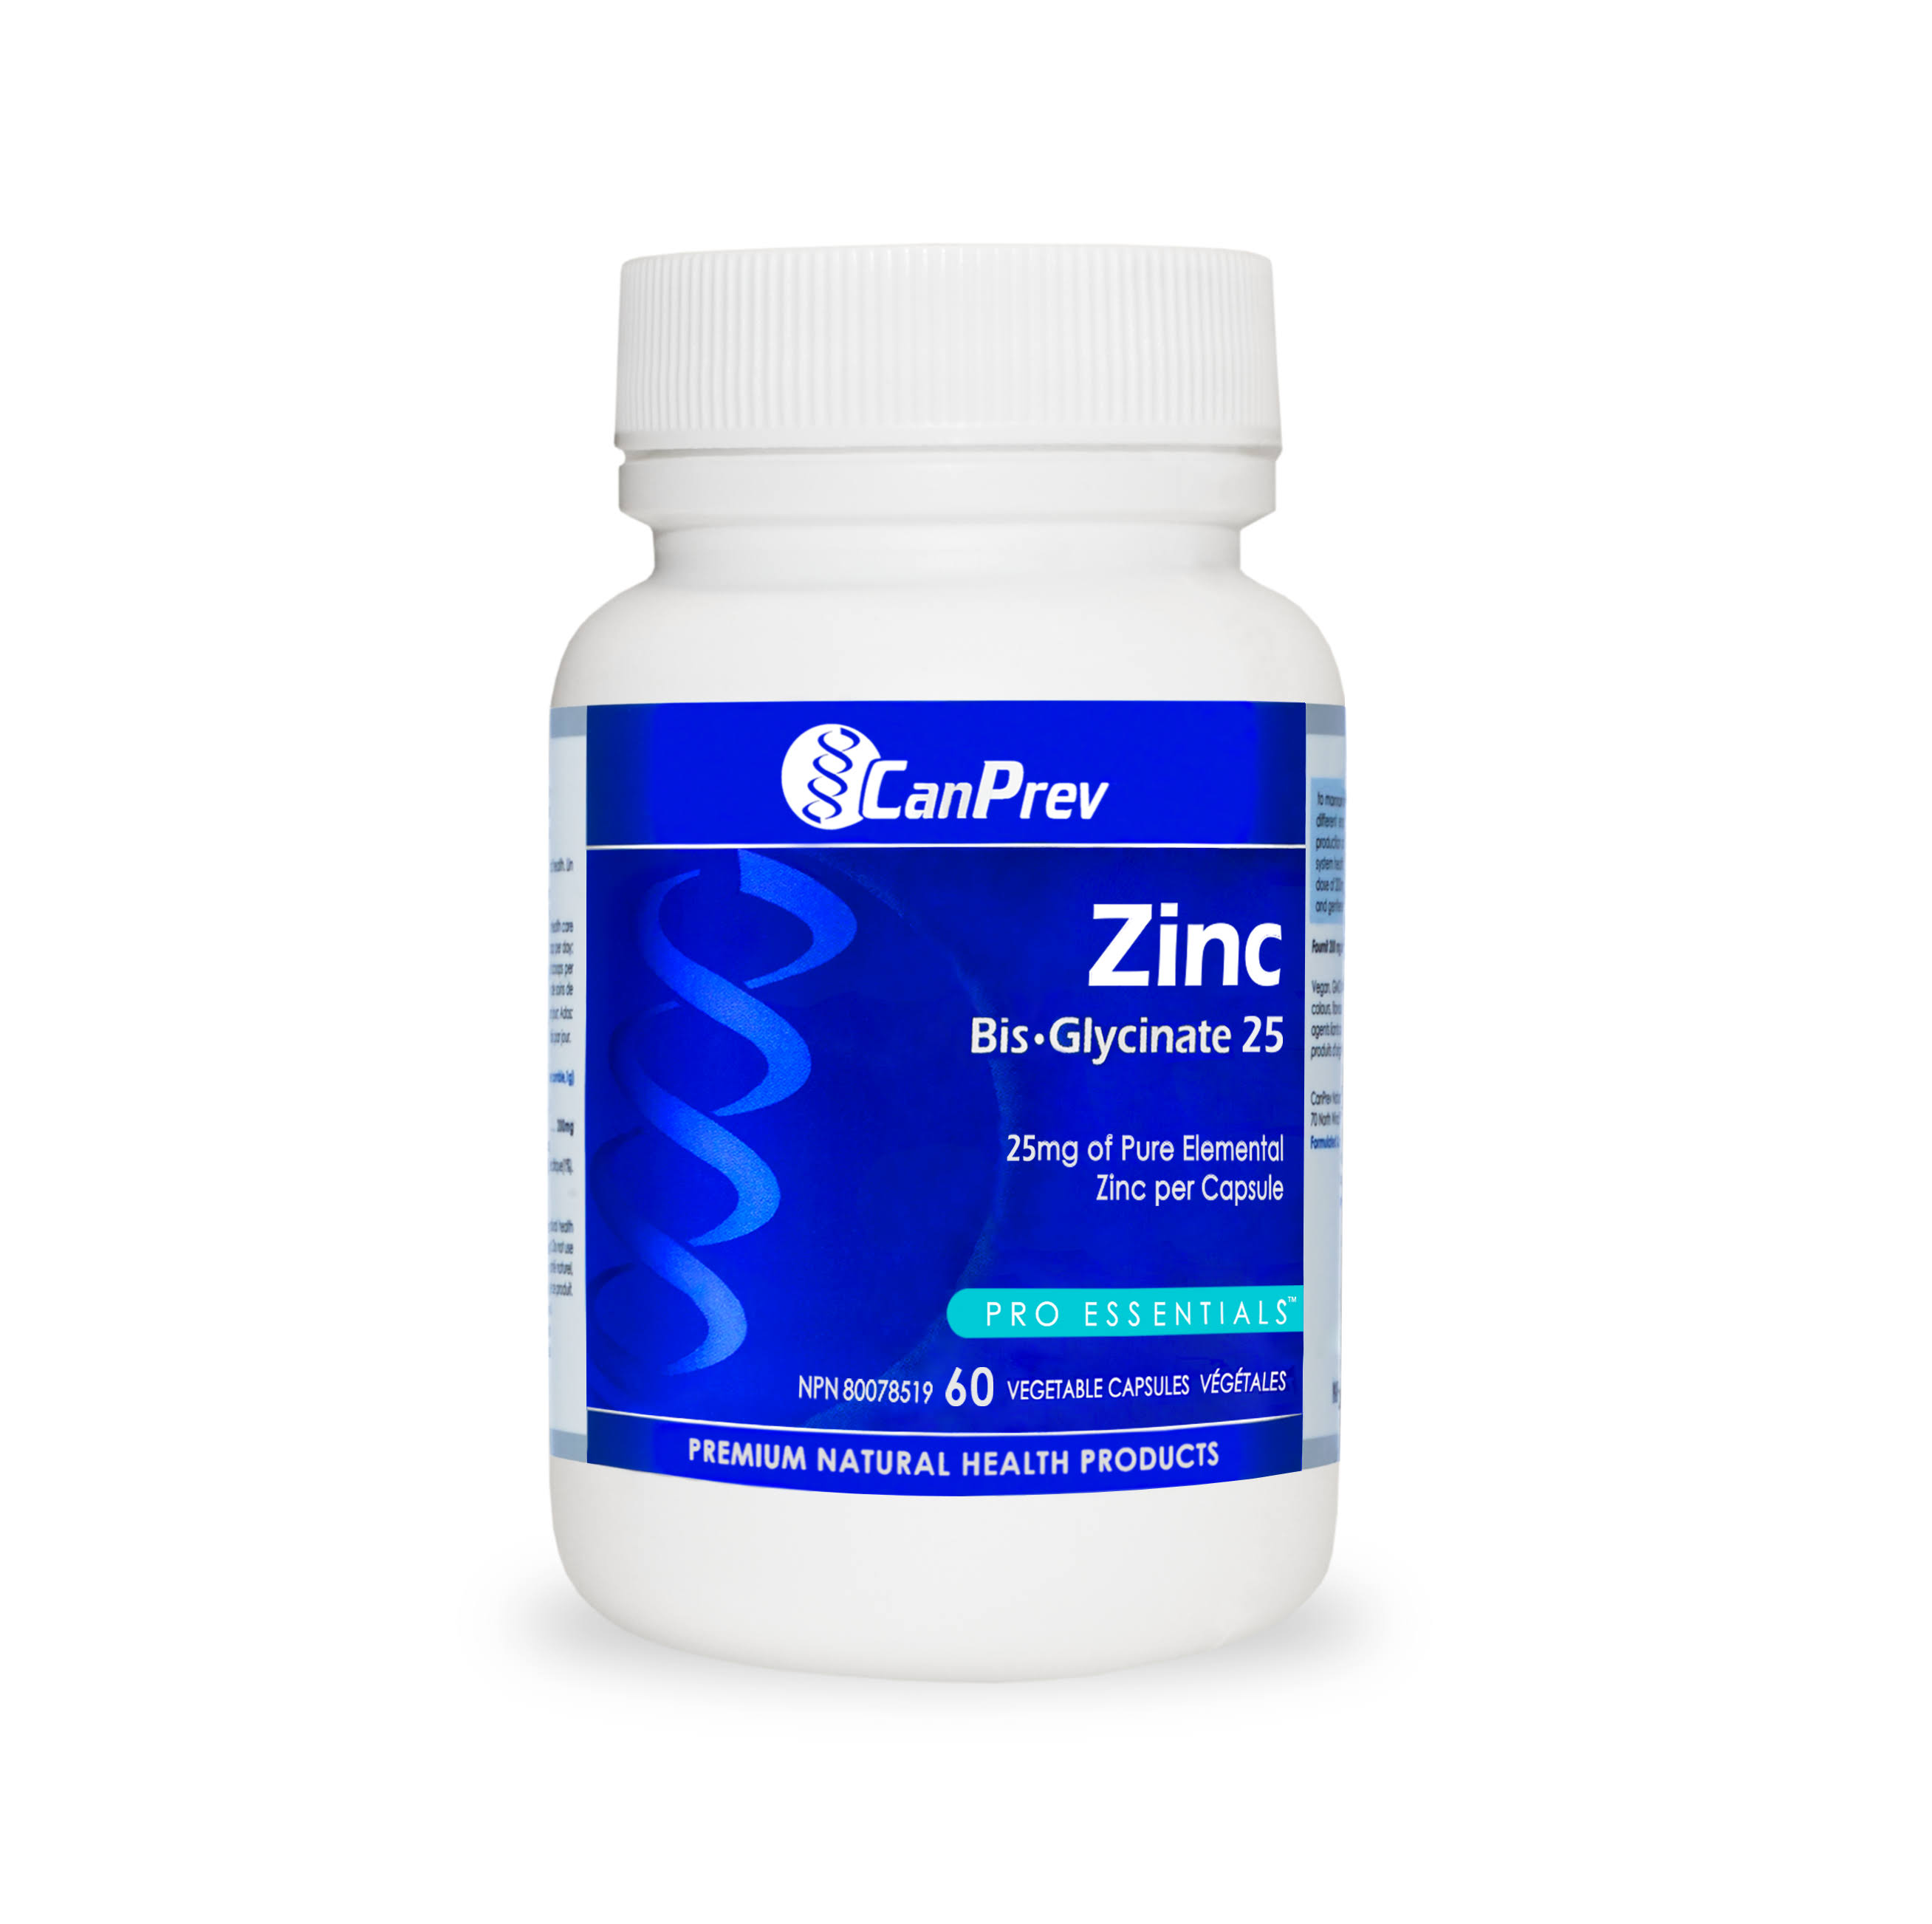 CanPrev Zinc Bis Glycinate 25 Vegetable Capsules - 25mg, Pack of 120